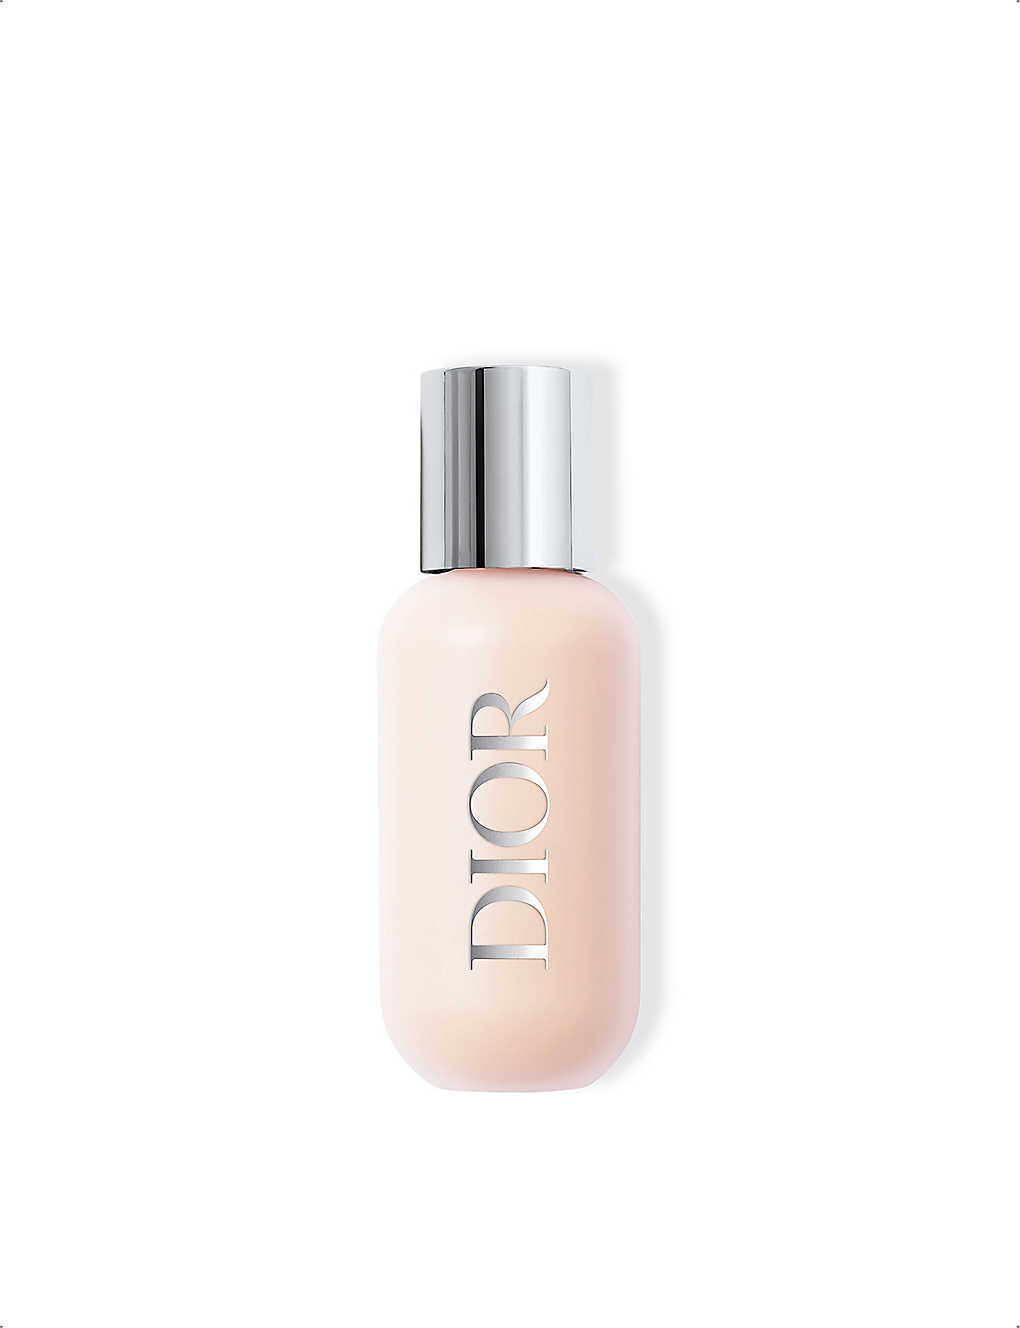 Dior Nude (lingerie) Backstage Face & Body Foundation 50ml In 0cr